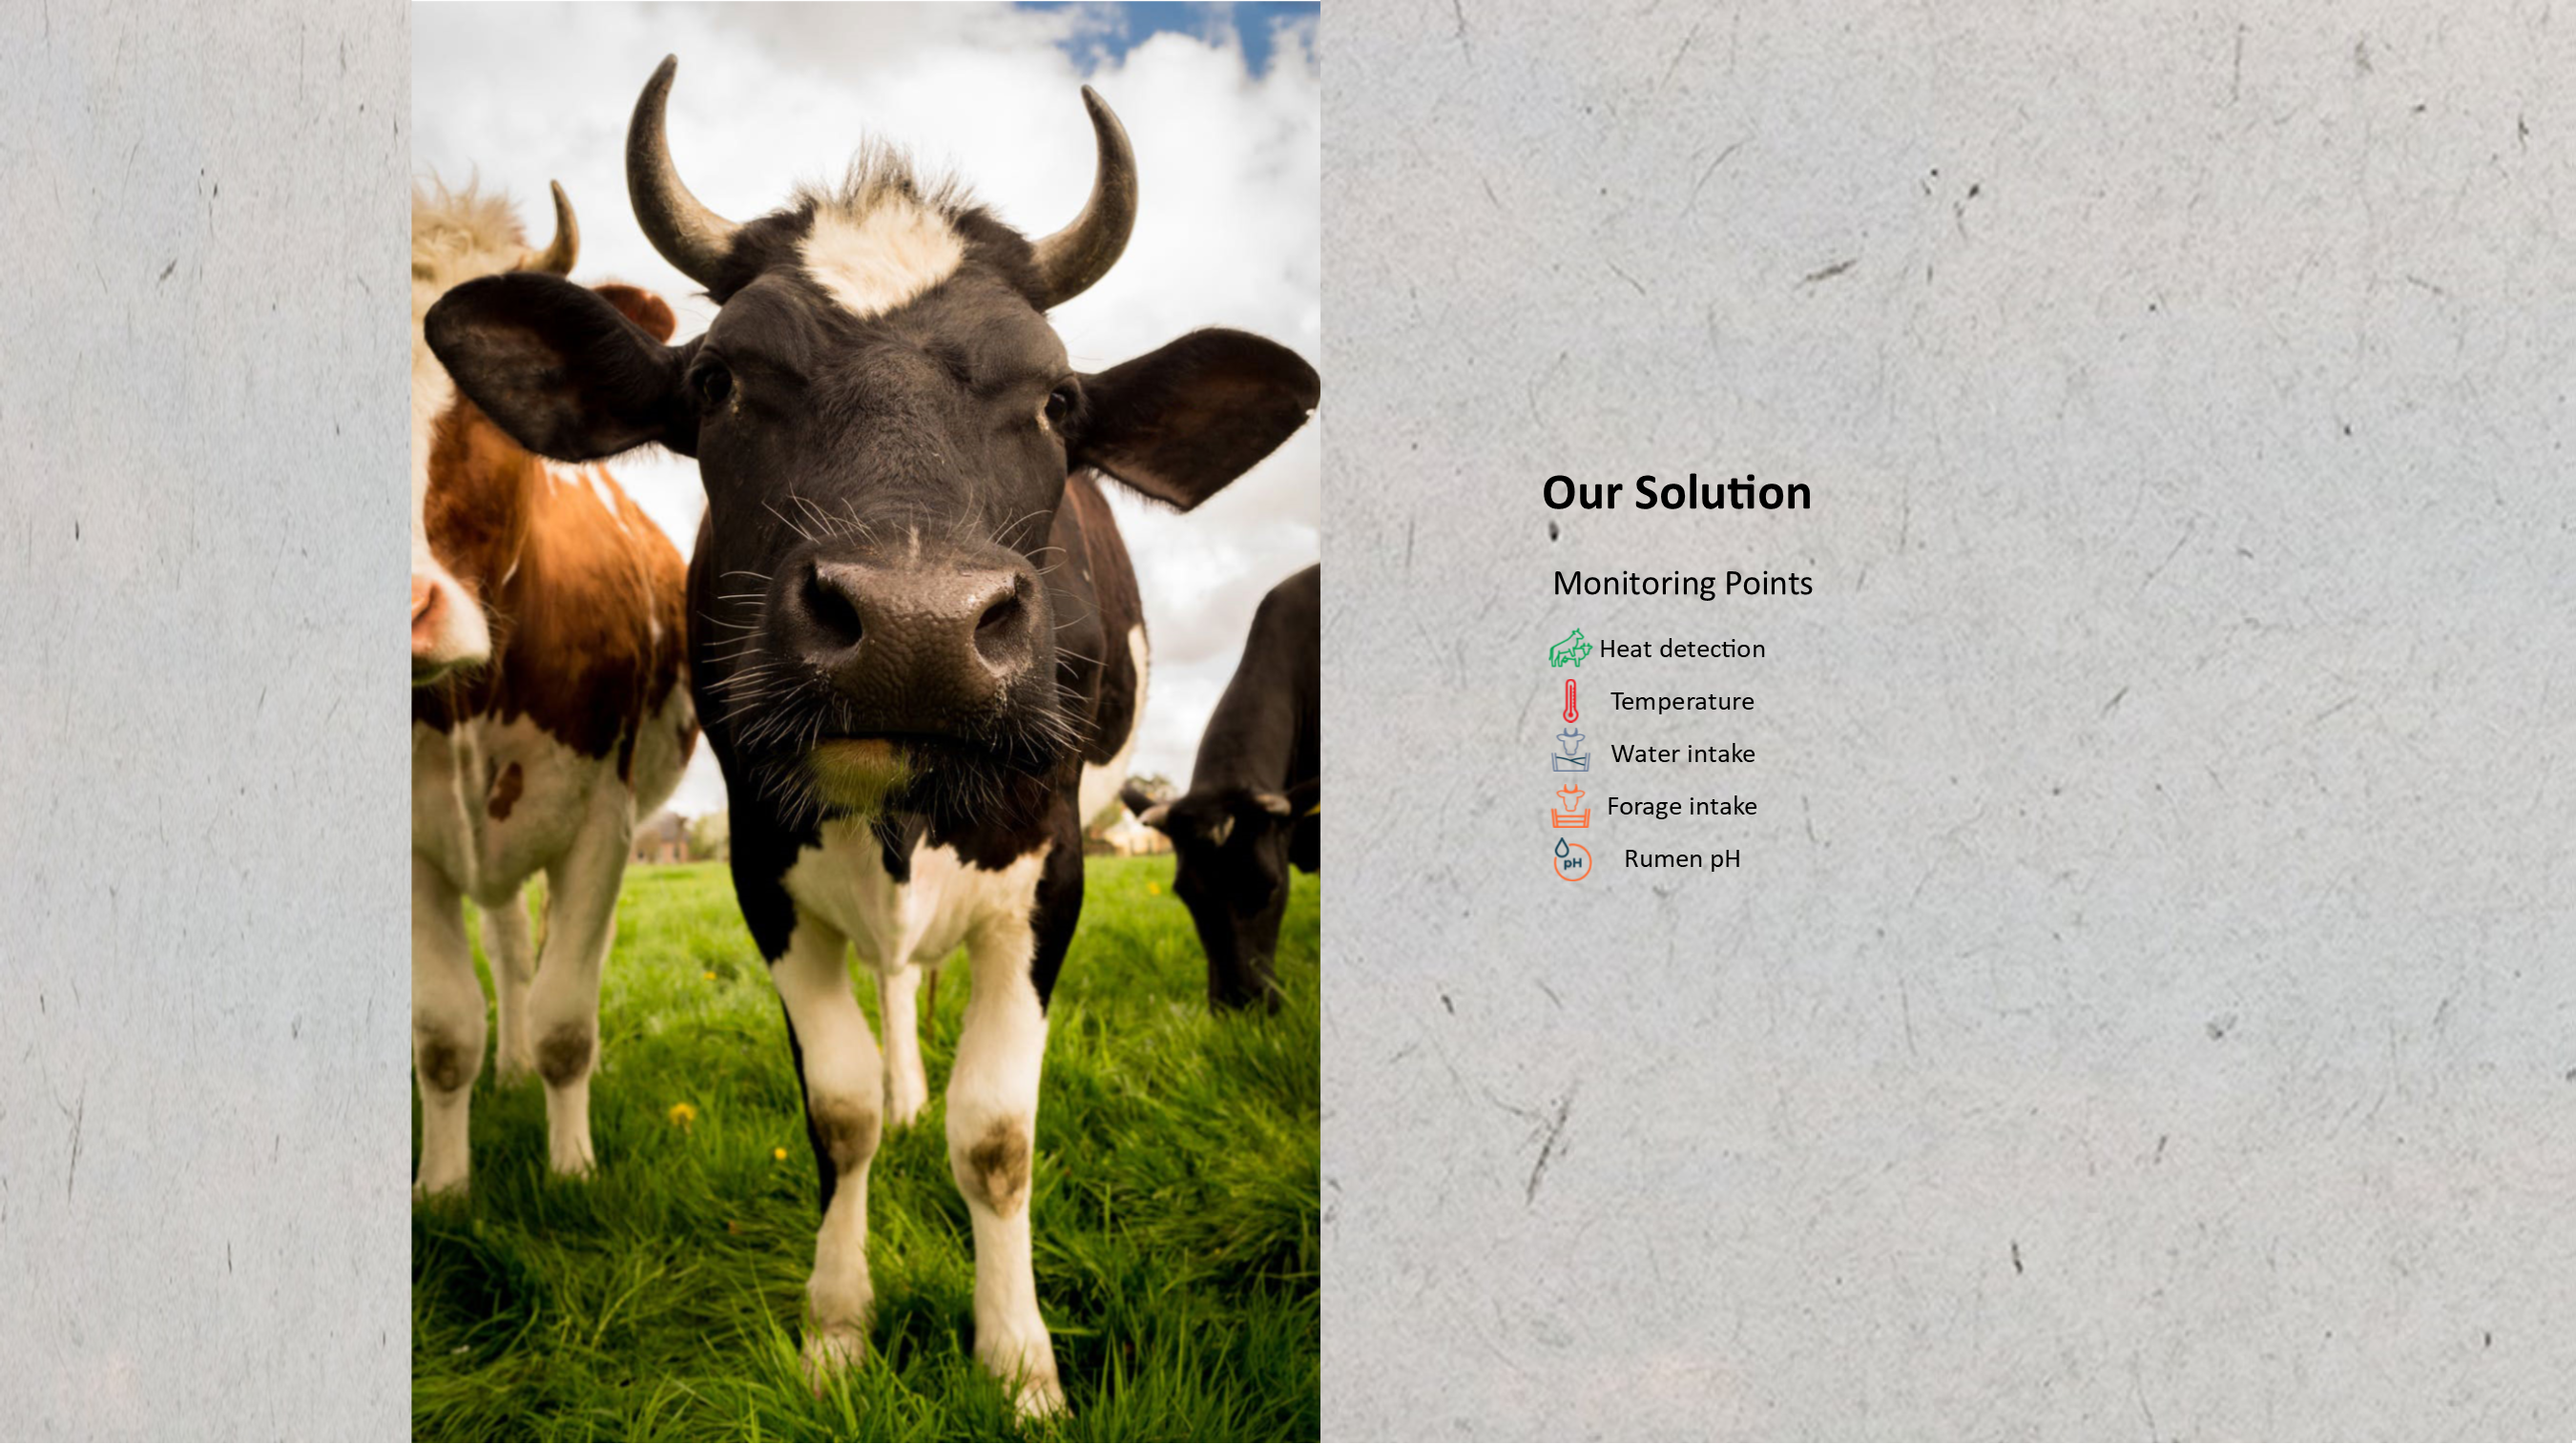 Moonsyst smart rumen bolus monitors heat detection, temperature, water intake and forage intake.